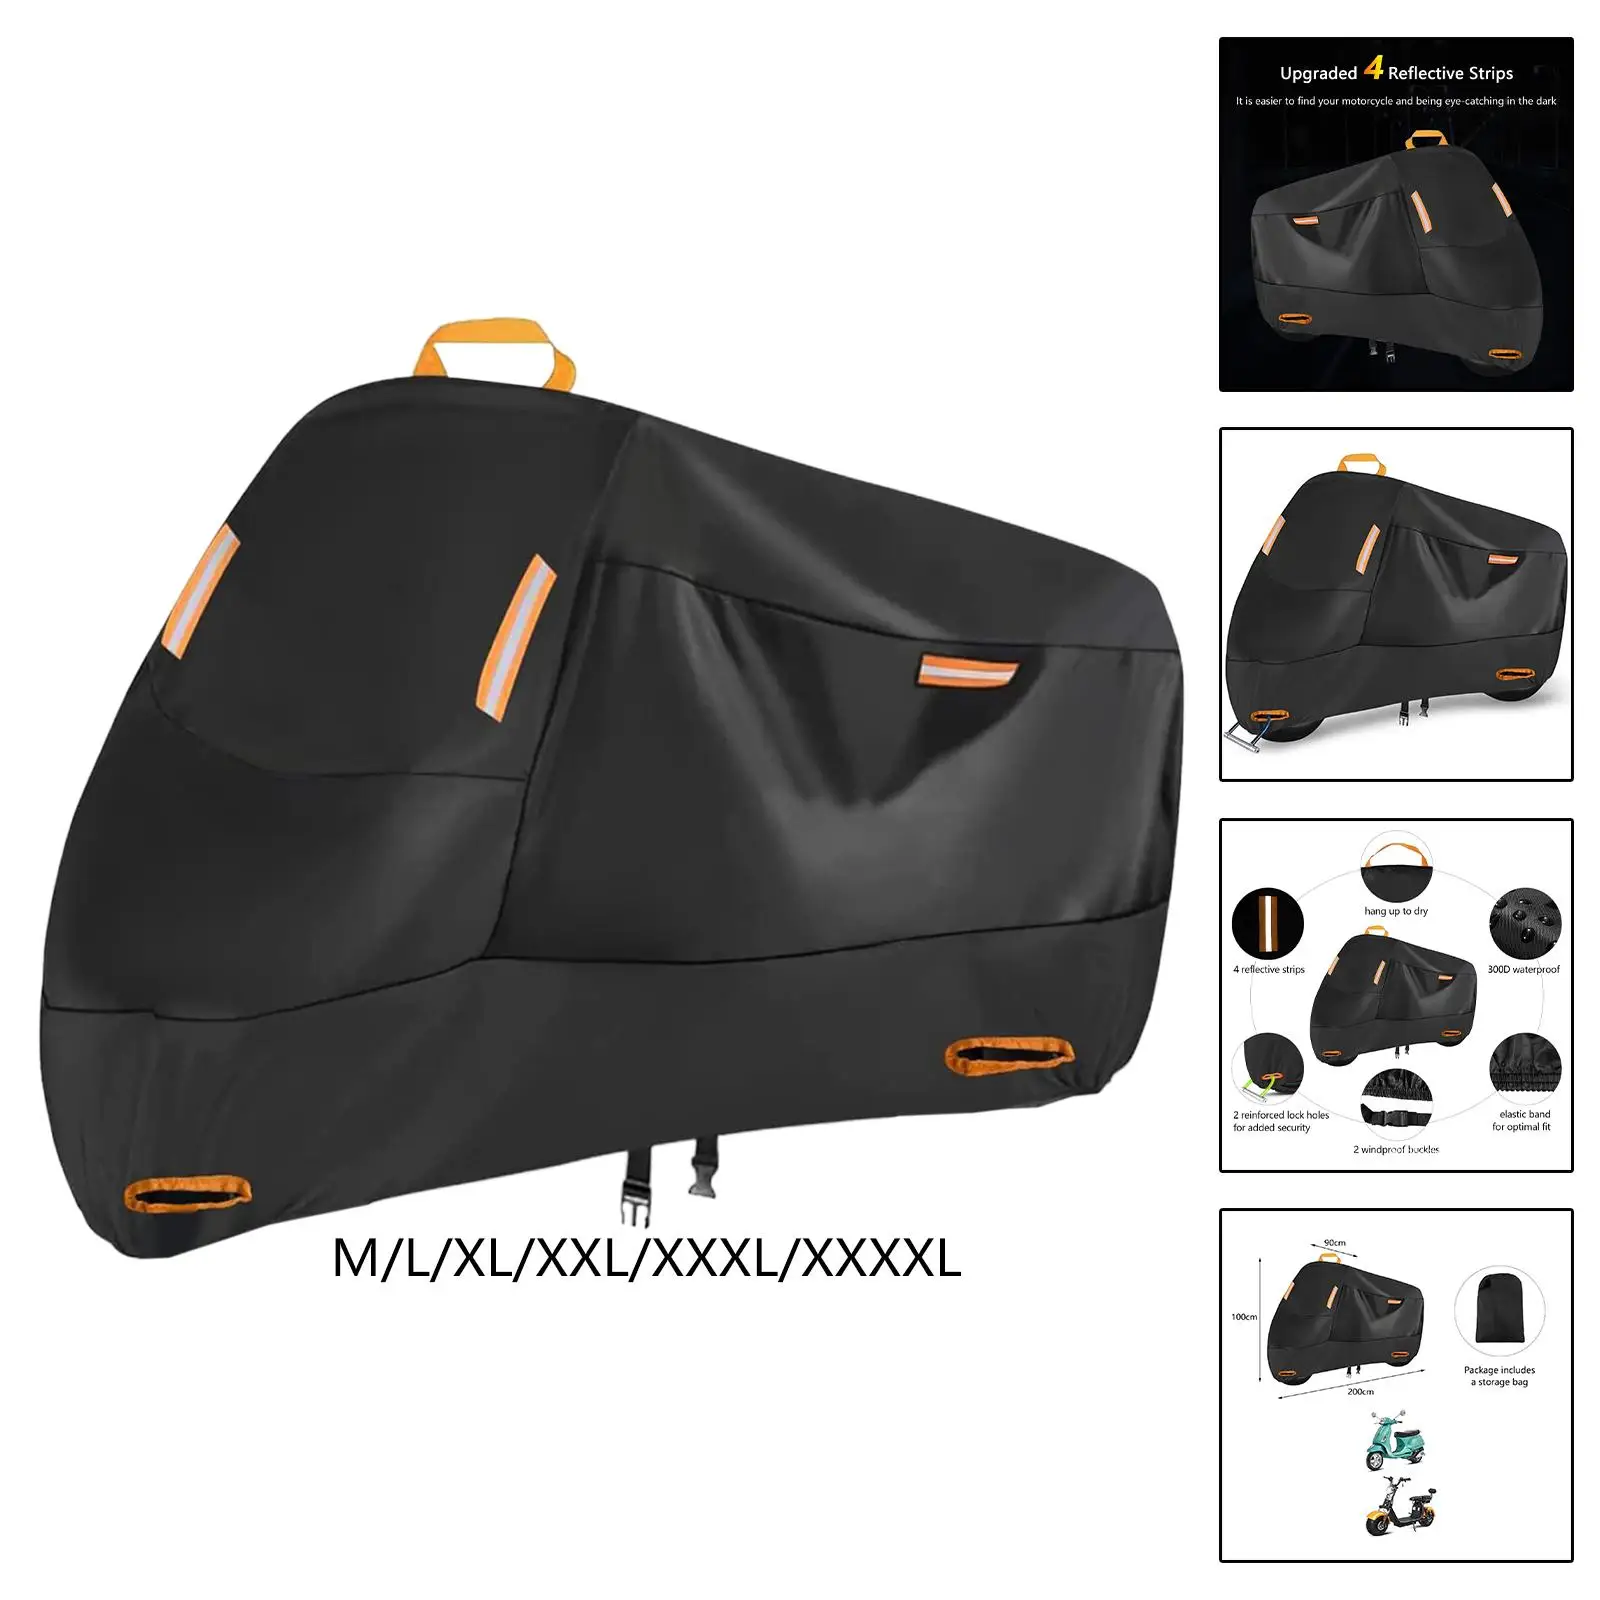 Motorcycle Cover Universal Scooter Cover for Motorbike Scooter Bike